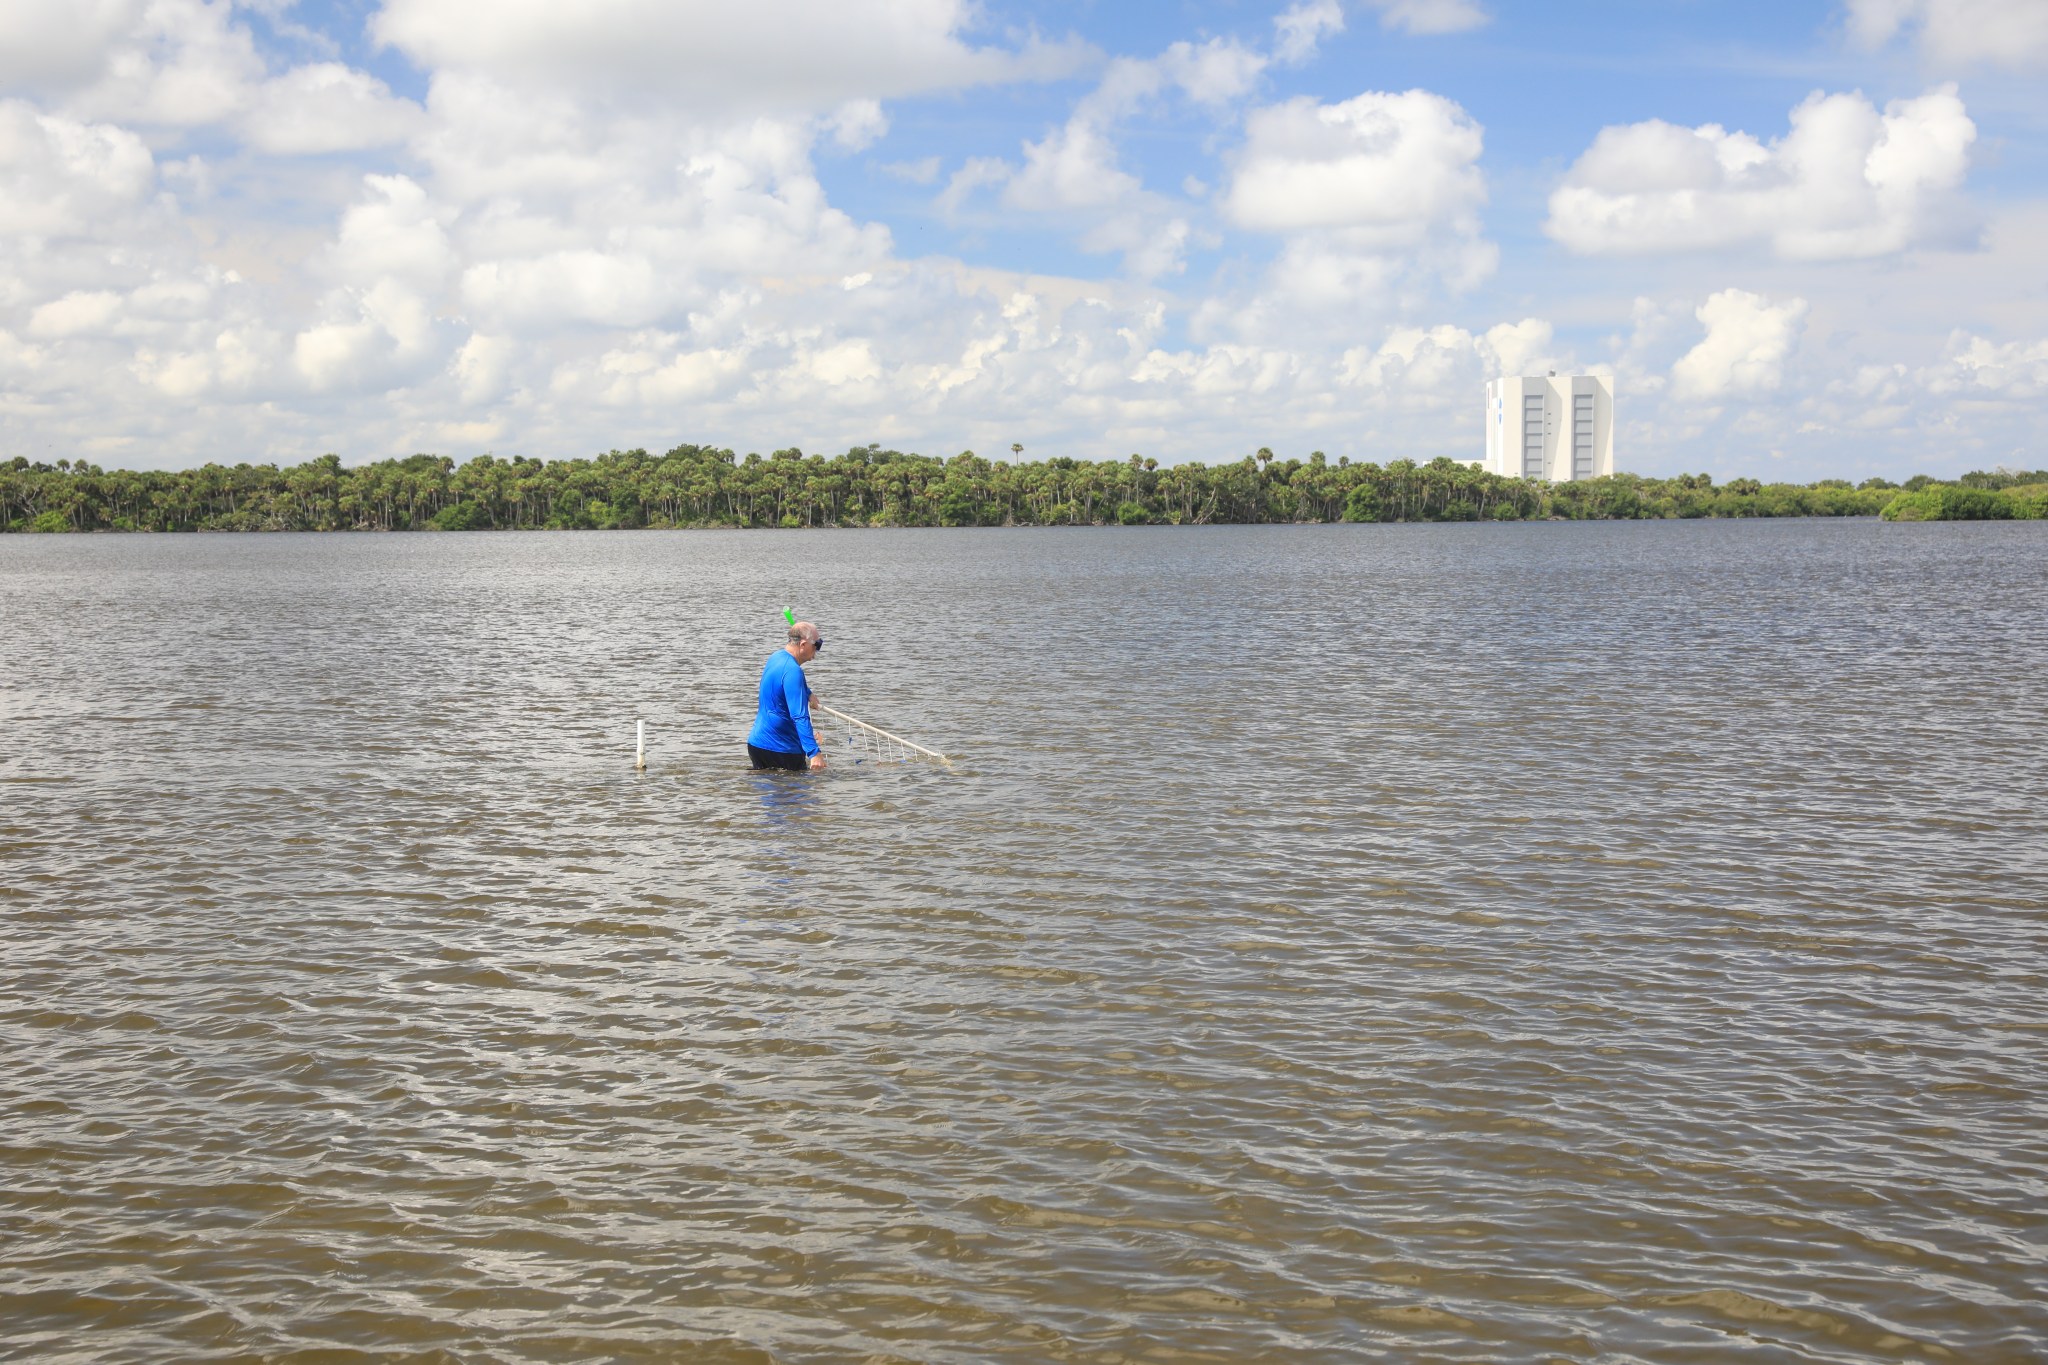 Aquatic biologist Doug Scheidt measures seagrass density at Pepper Flats, just south of the visitors gantry at Kennedy Space Center.